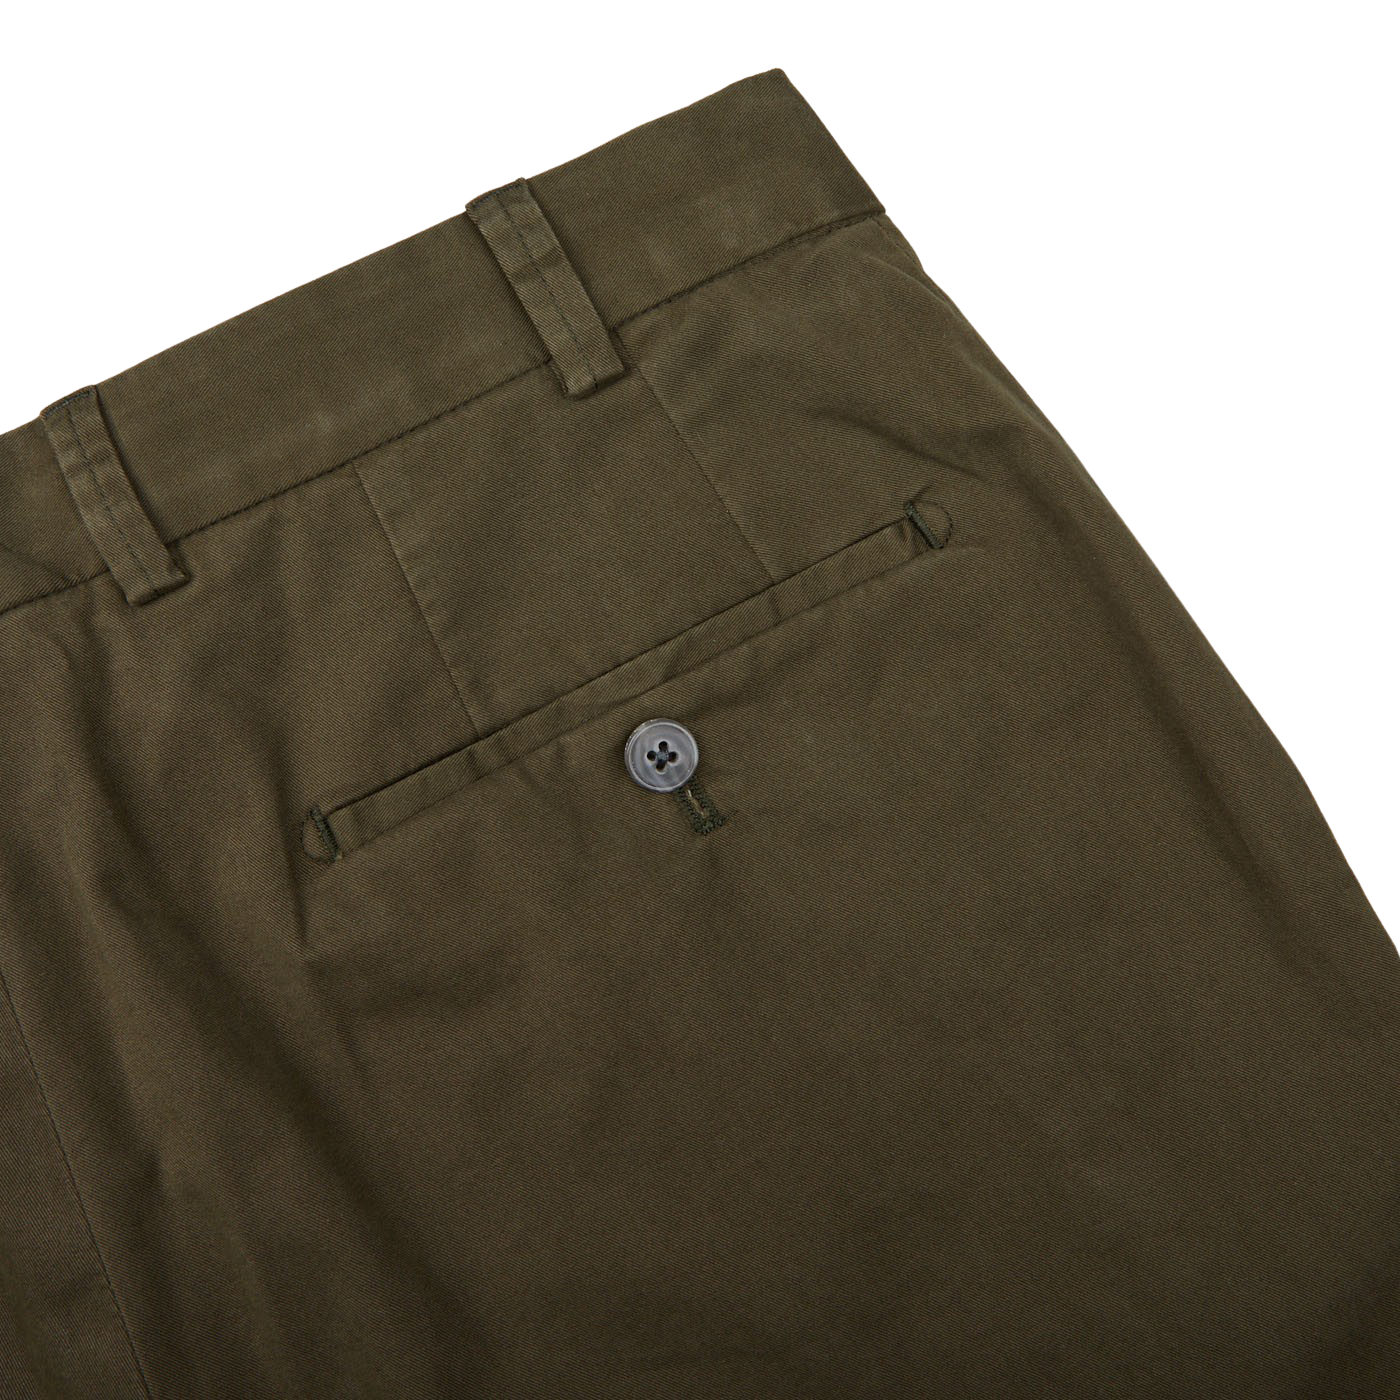 US Ranger BDU Trousers - Olive Green Cotton Combat Army Military Pants XS -  7XL | eBay